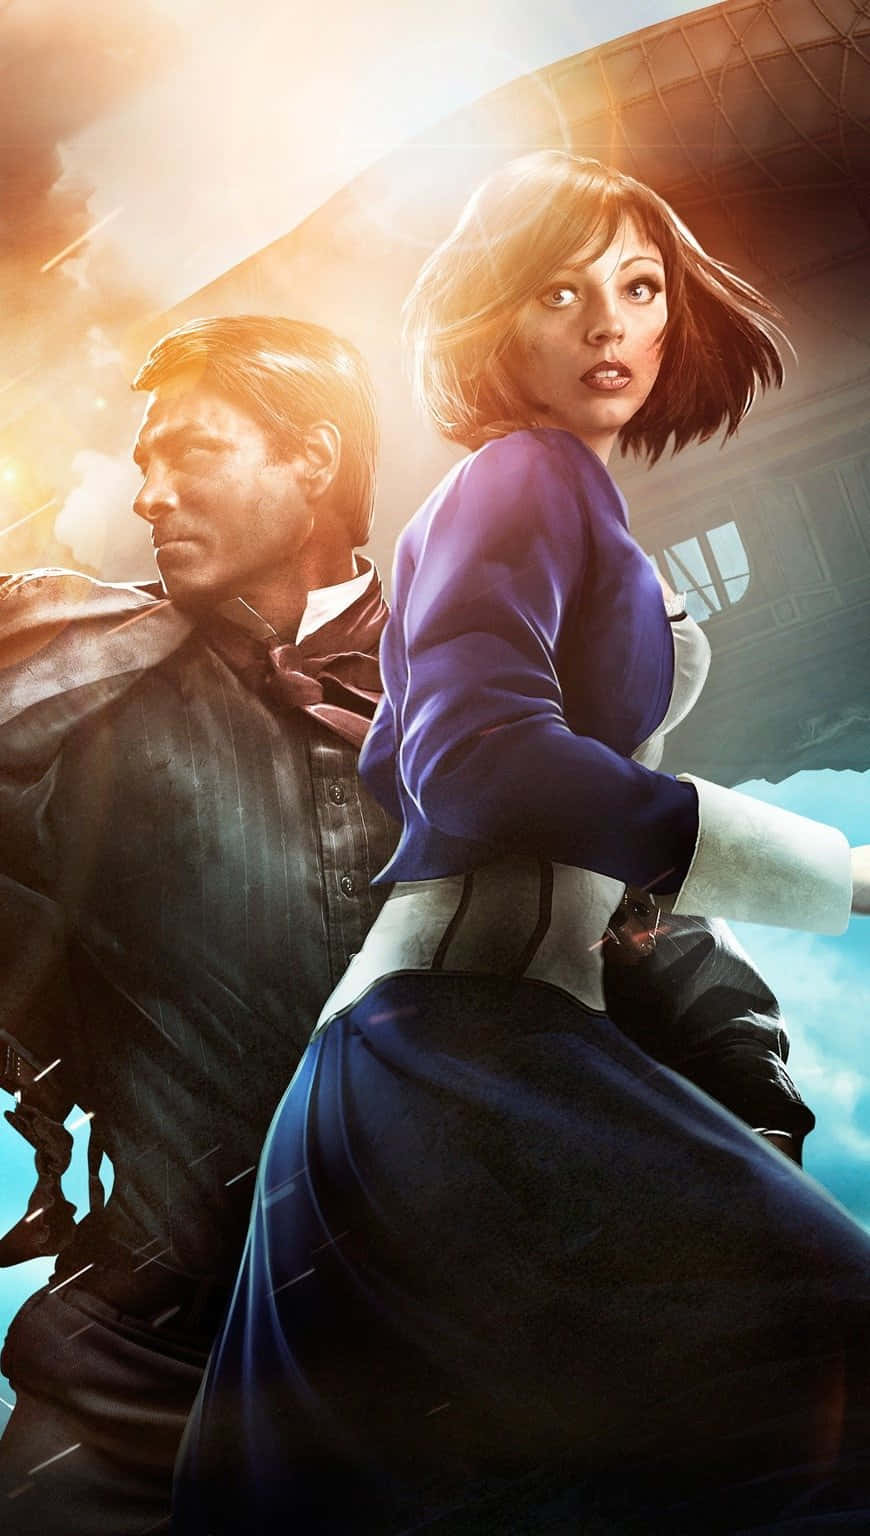 4K Bioshock Experience On Your iPhone Wallpaper